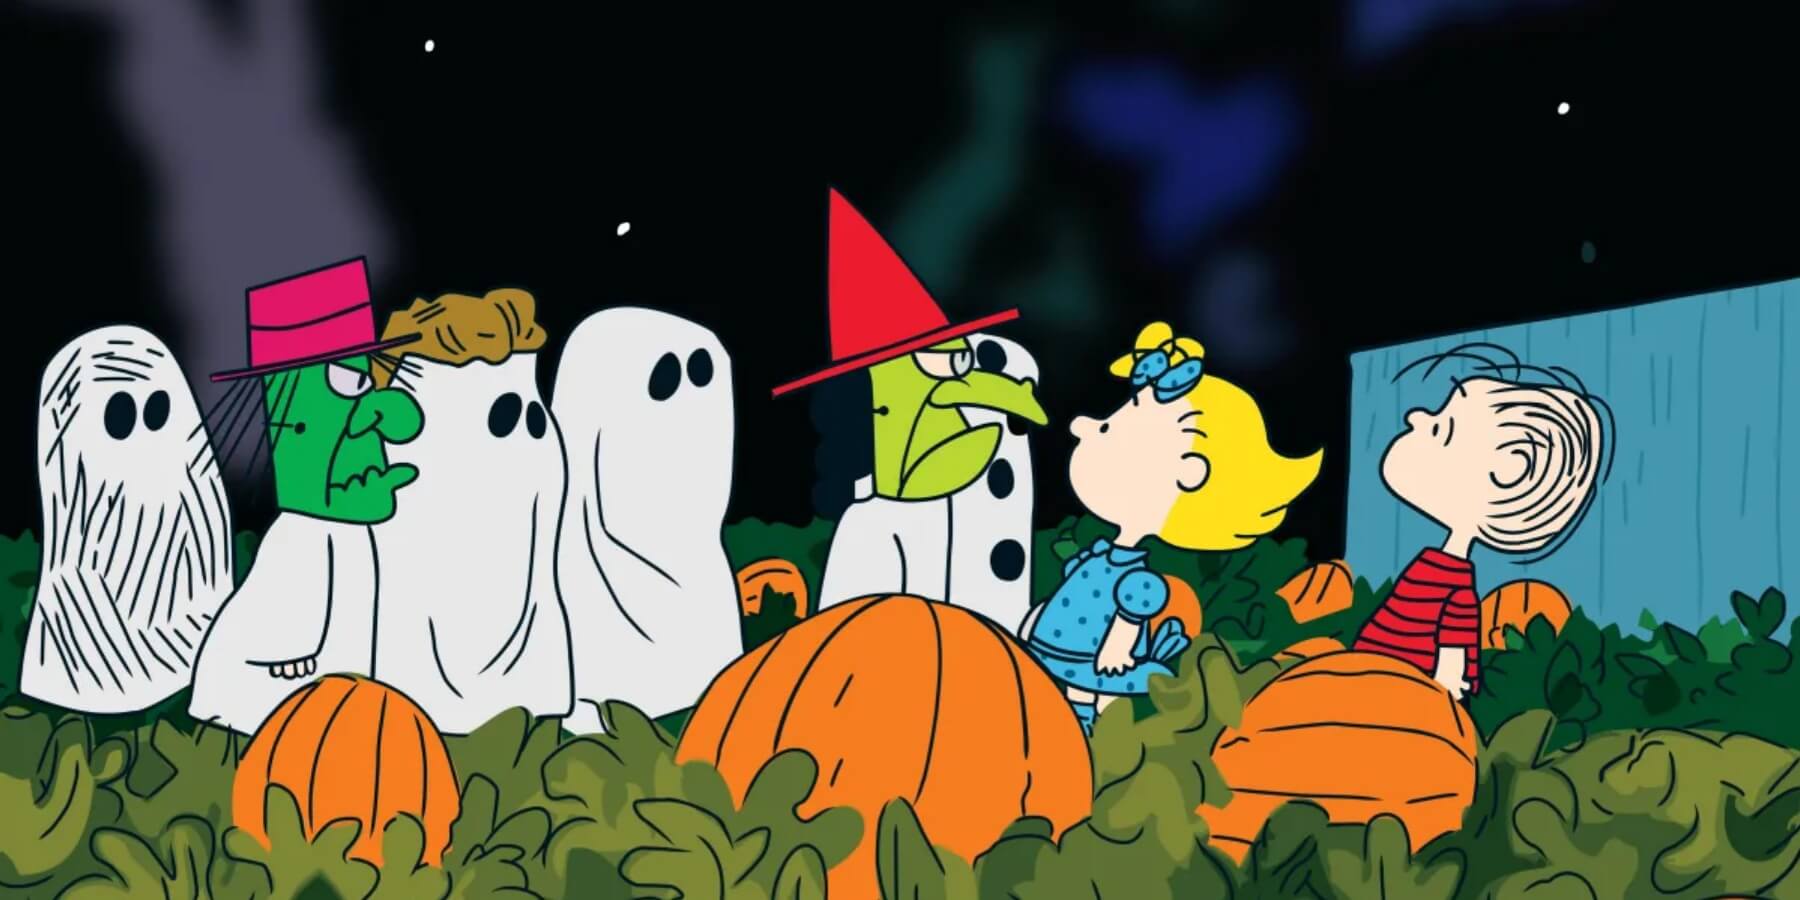 'It's The Great Pumpkin Charlie Brown' is an animated holiday classic.